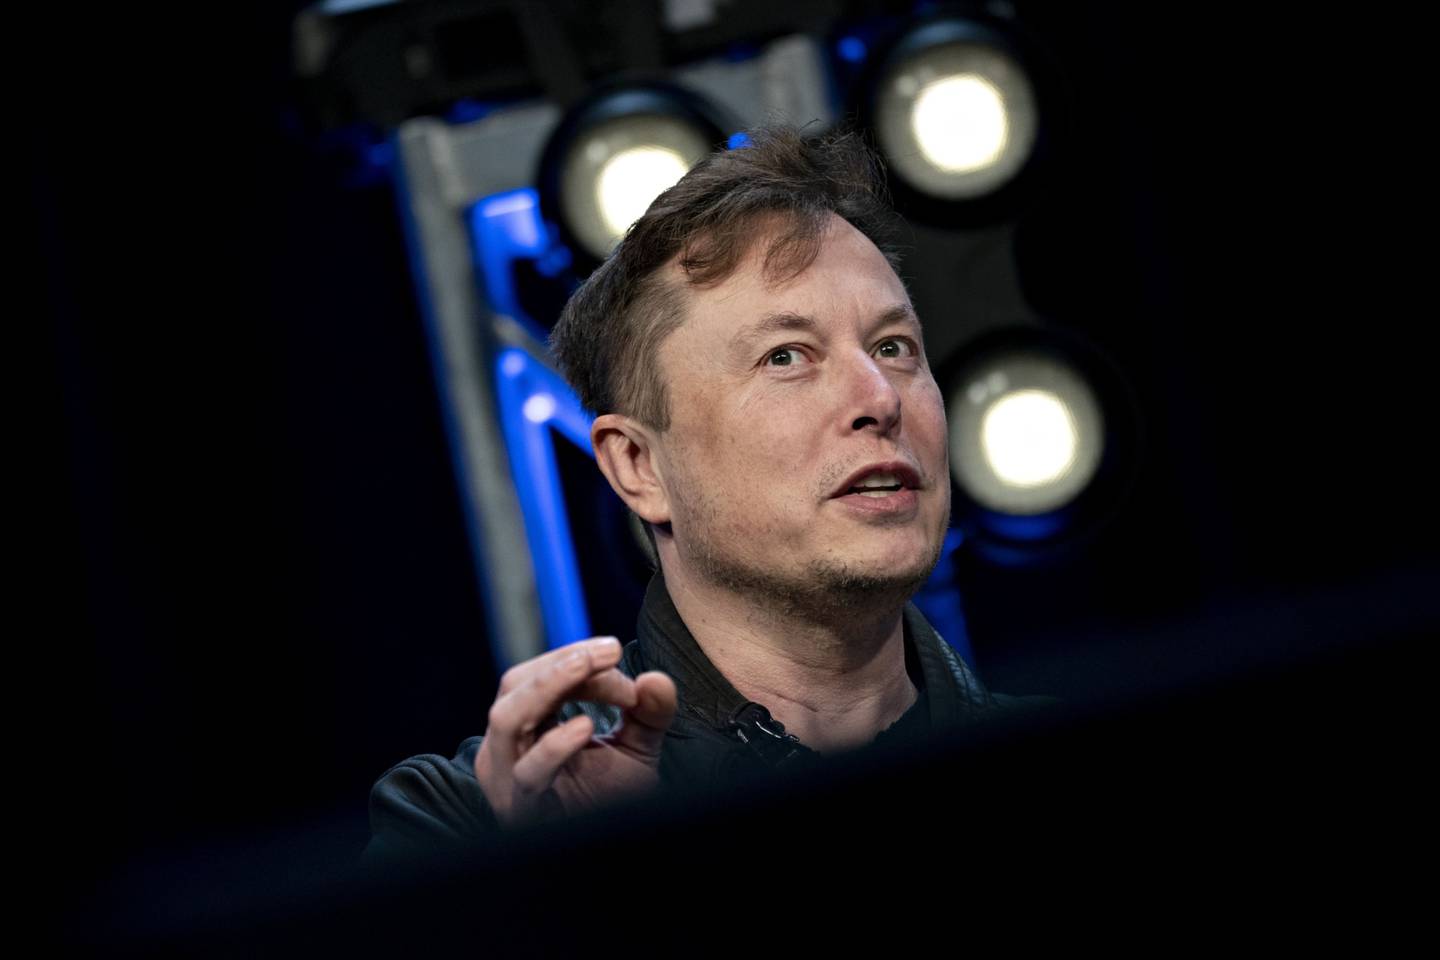 Elon Musk, founder of SpaceX and chief executive officer of Tesla Inc., speaks during a discussion at the Satellite 2020 Conference in Washington, D.C., U.S., on Monday, March 9, 2020.